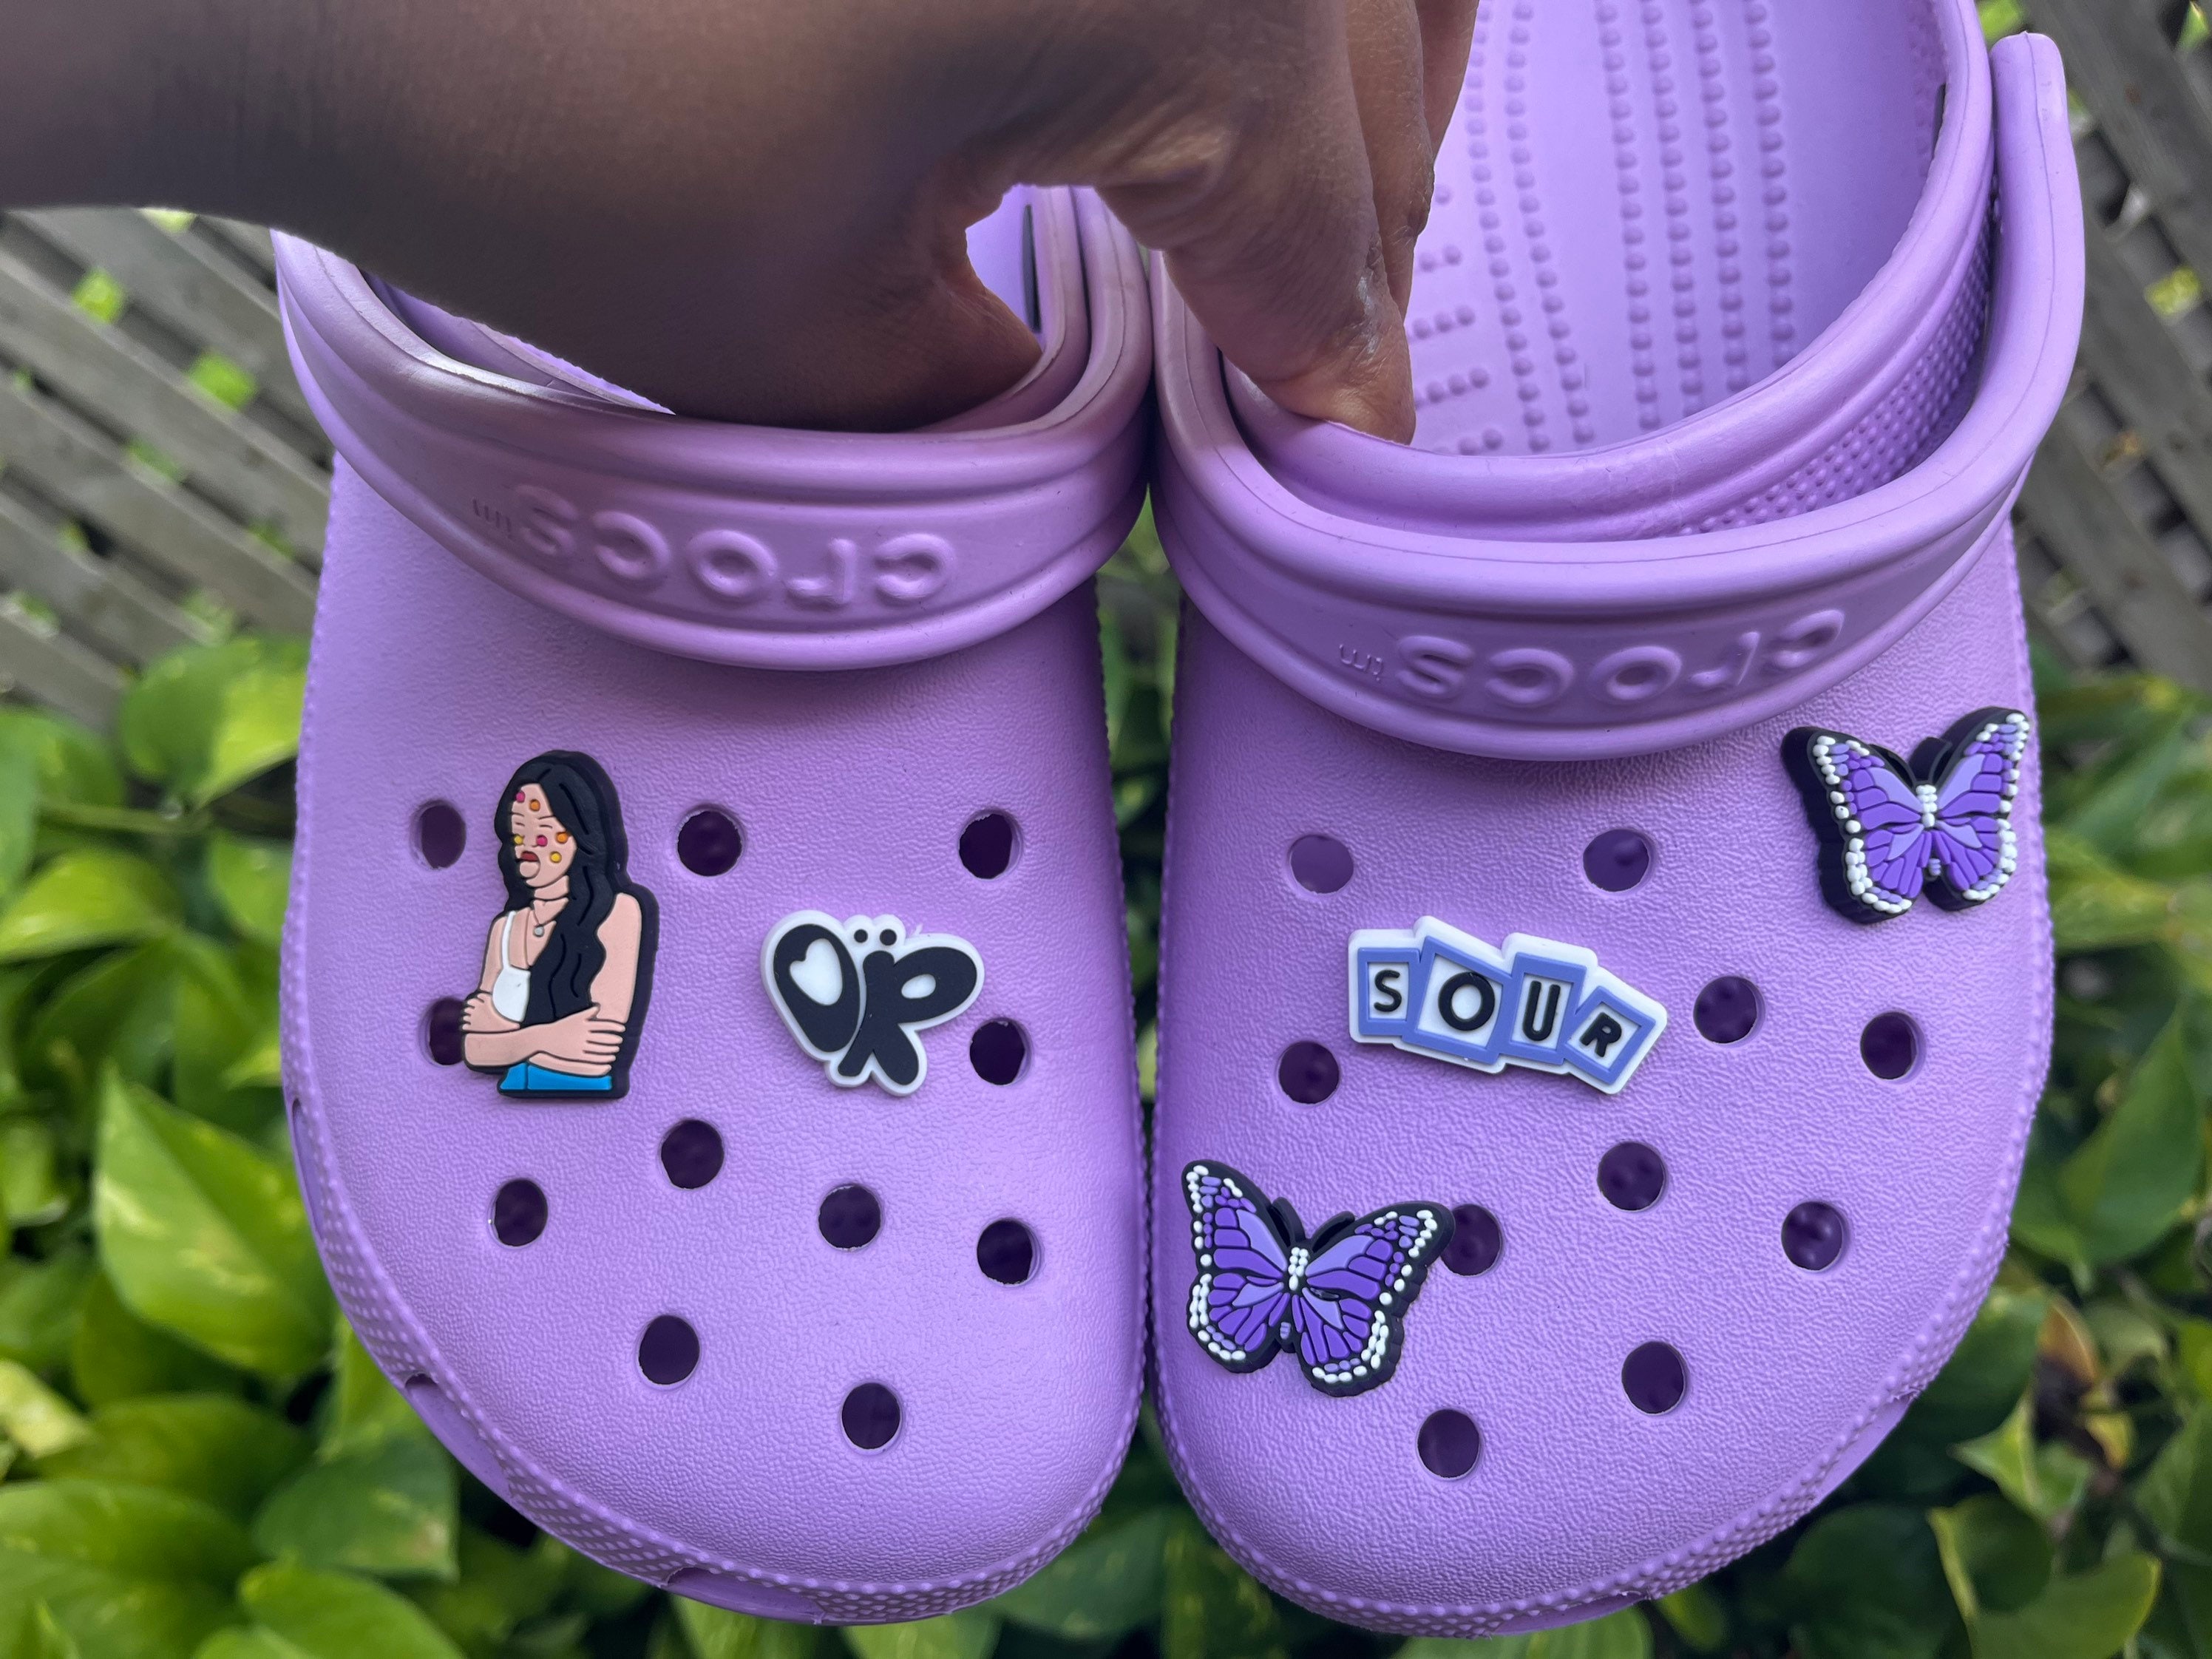 Famous Footwear - Load up your lilac Crocs 💜 Jibbitz™ charms sold  separately. Available in stores and for in-store pickup. Monochrome magic